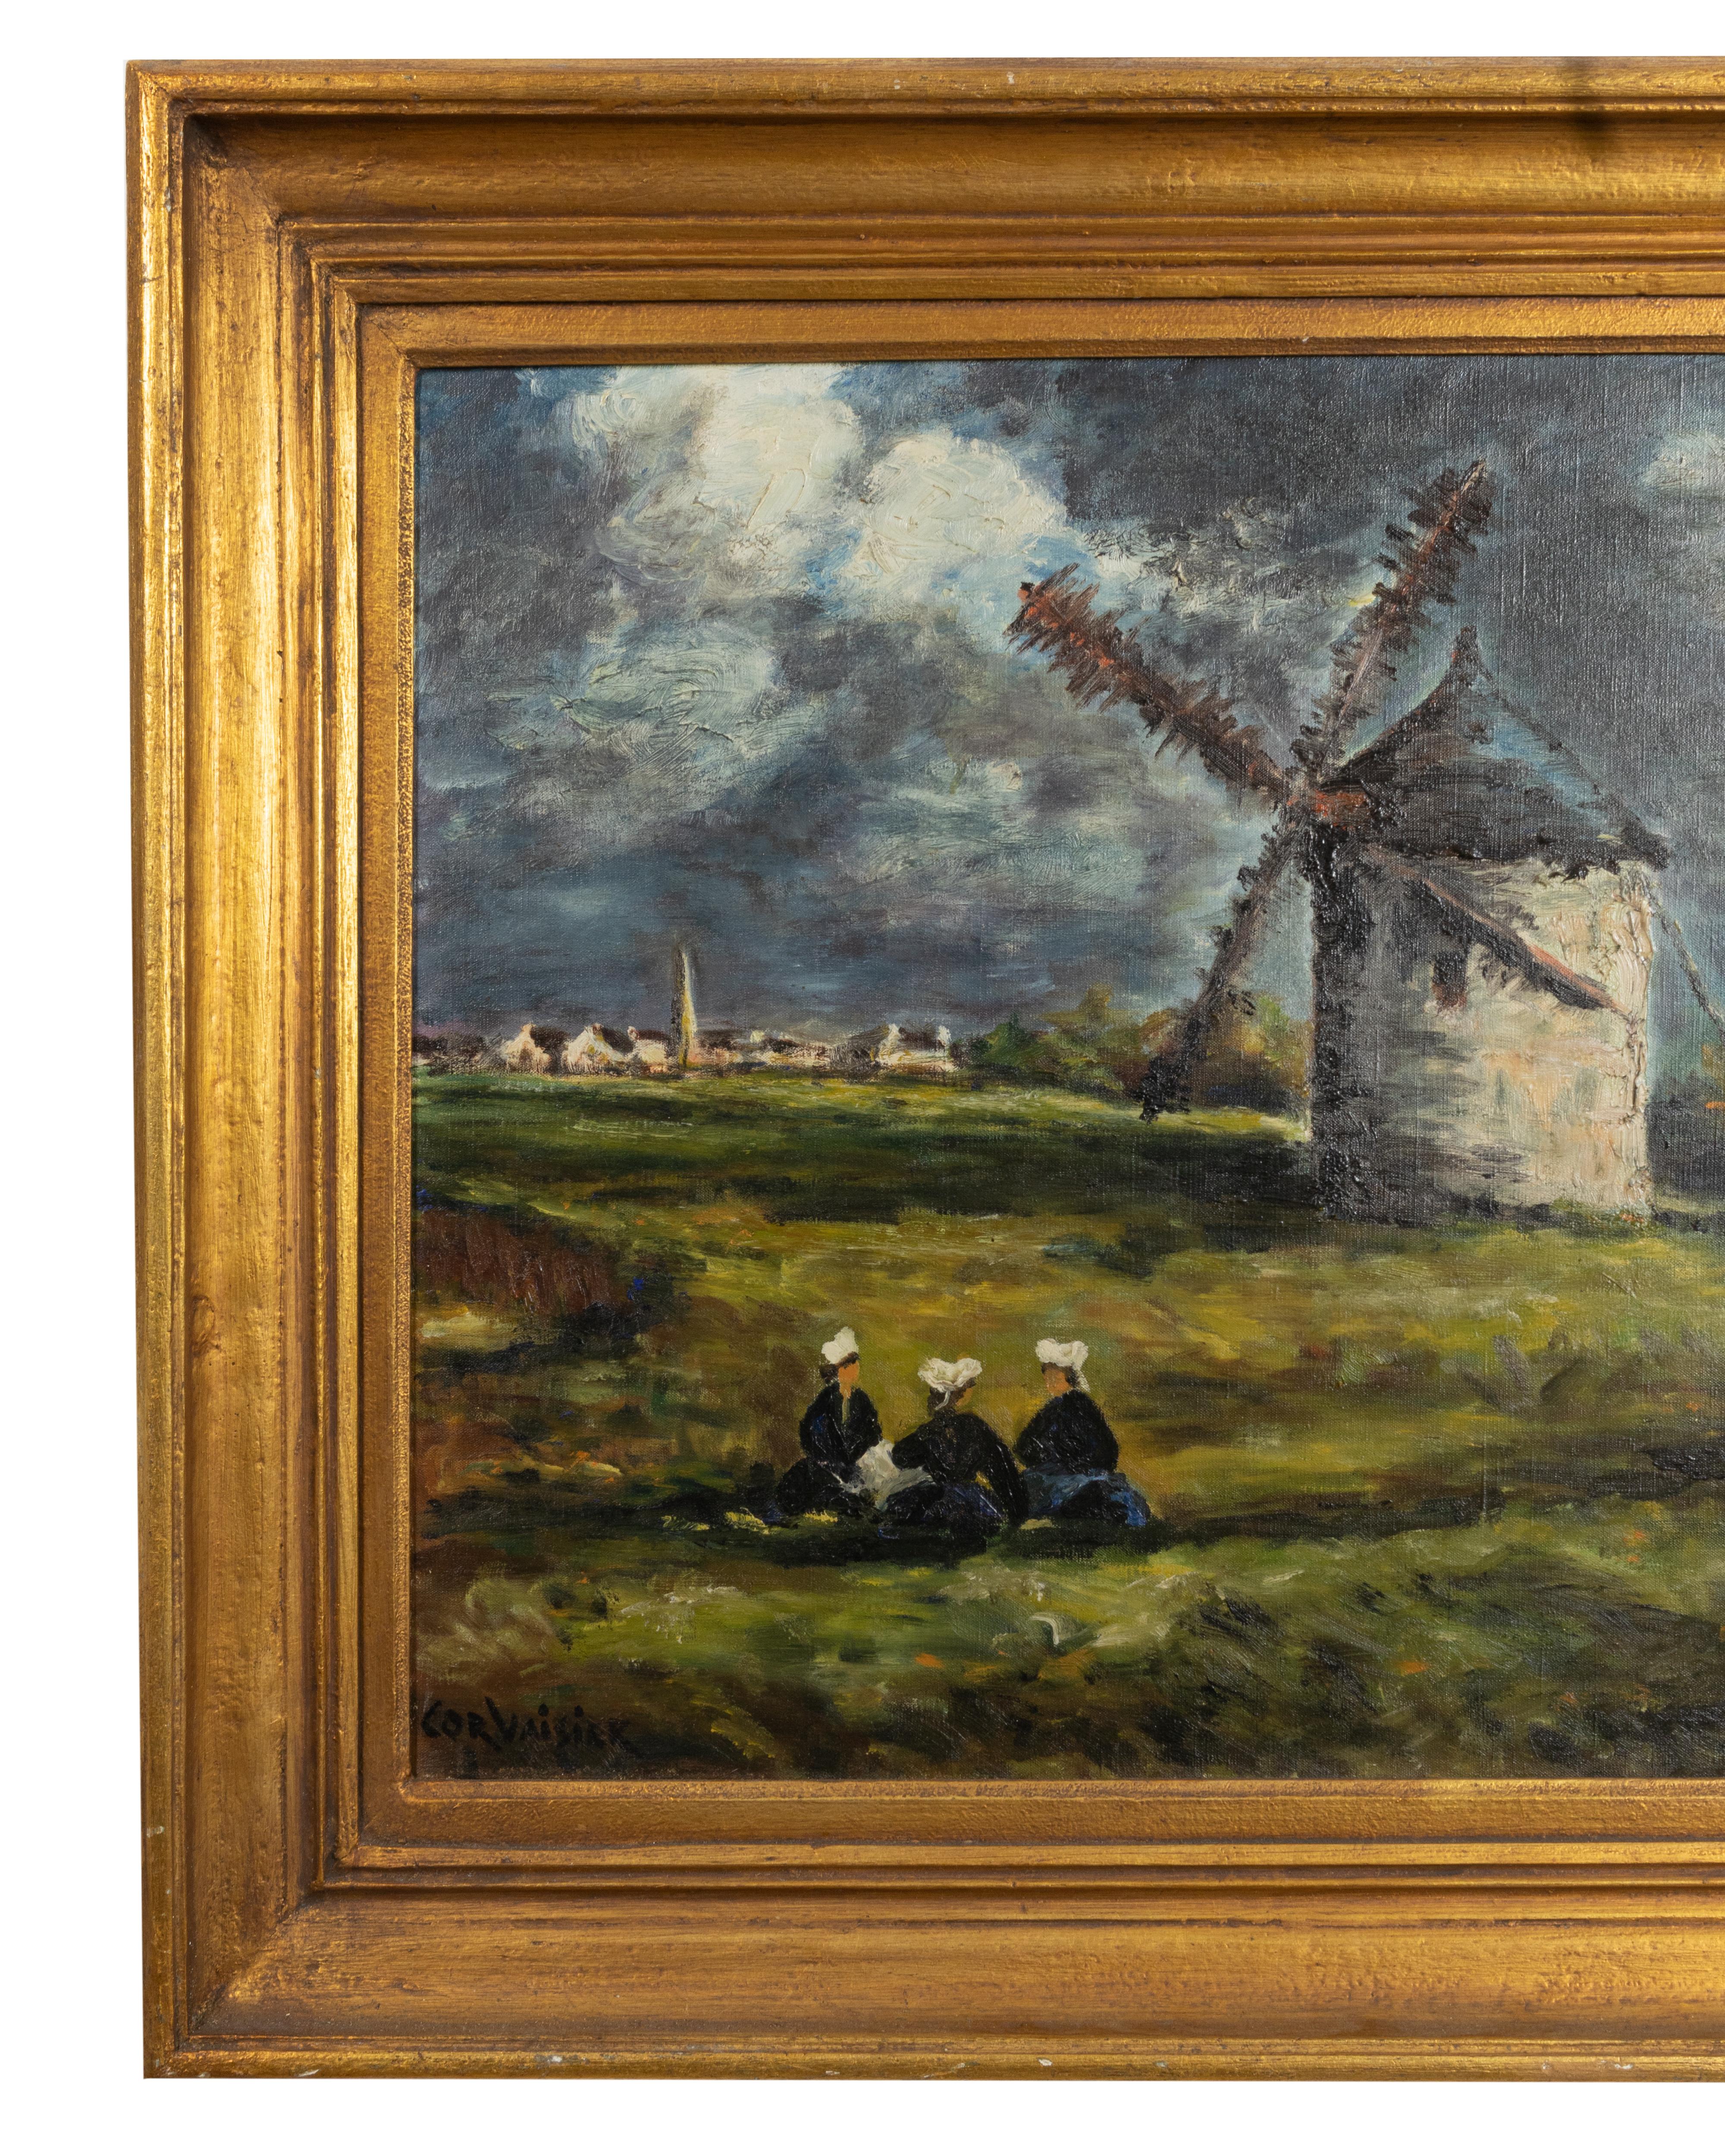 A visually striking painting executed in the Barbizon School style, this artwork portrays a serene countryside scene where three women seek refuge beneath a picturesque windmill. In the faraway distance, a quaint village and a church tower add to